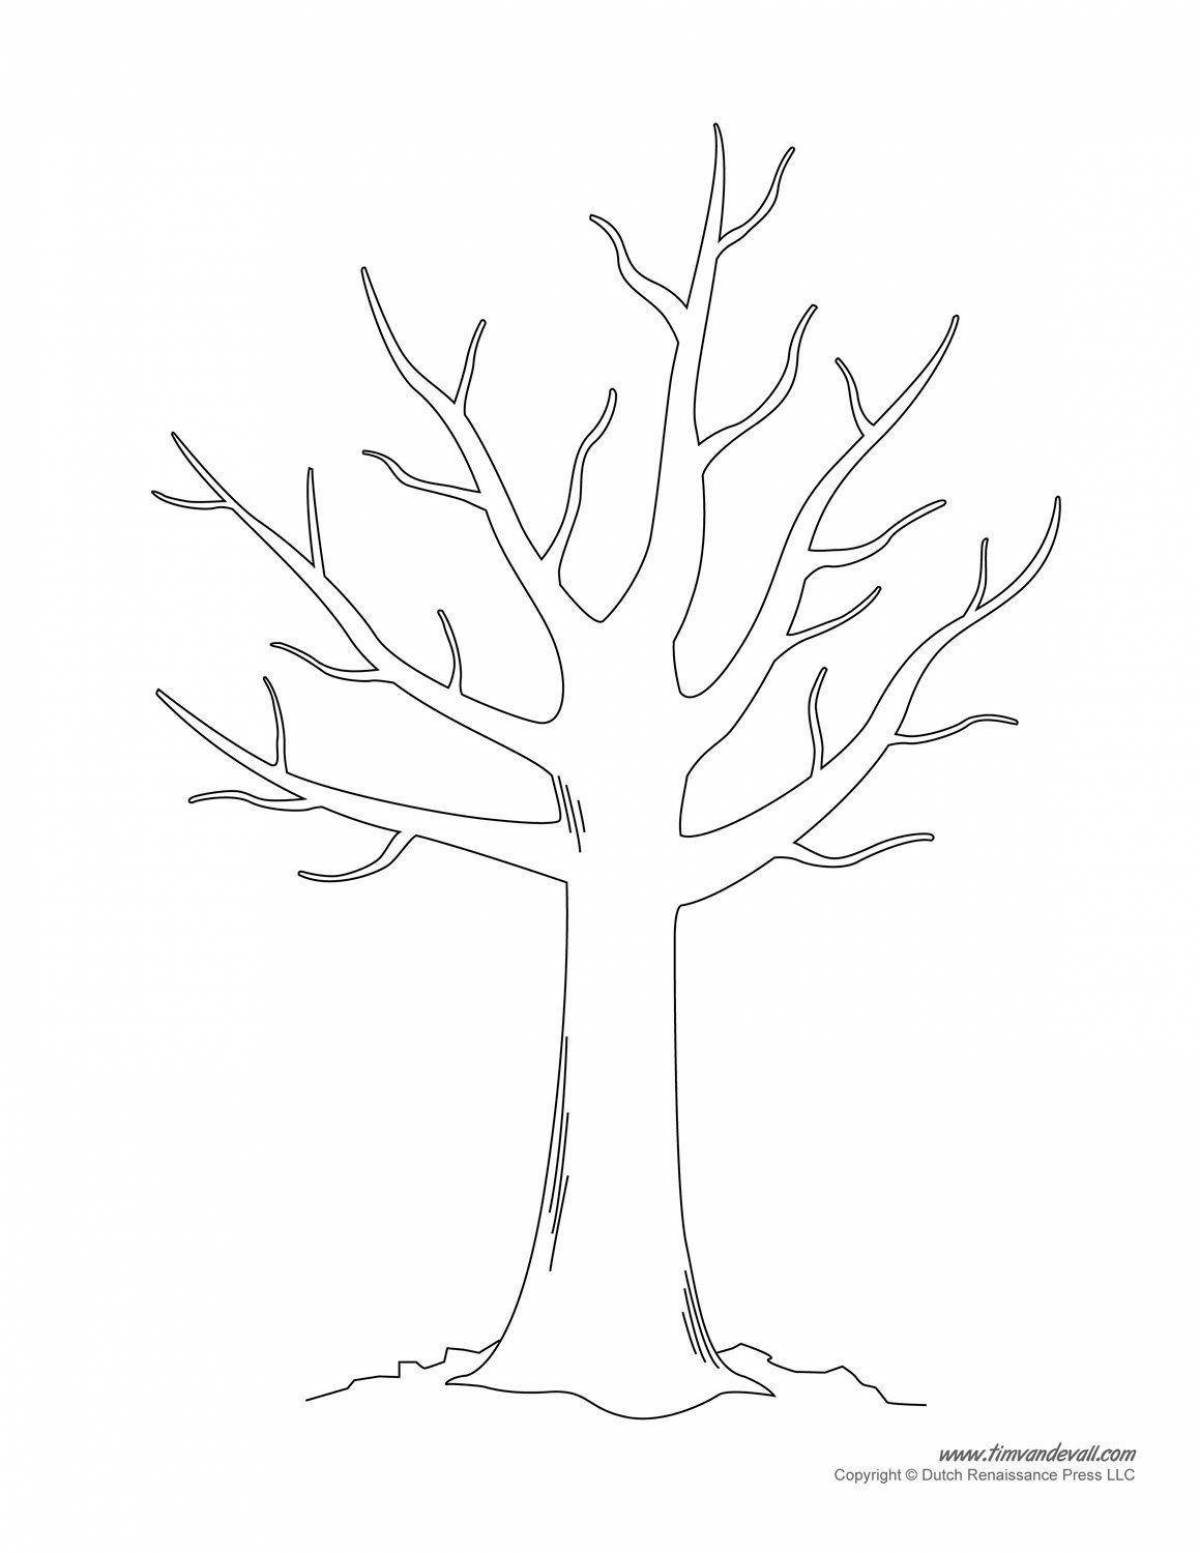 Glowing tree trunk coloring page for kids